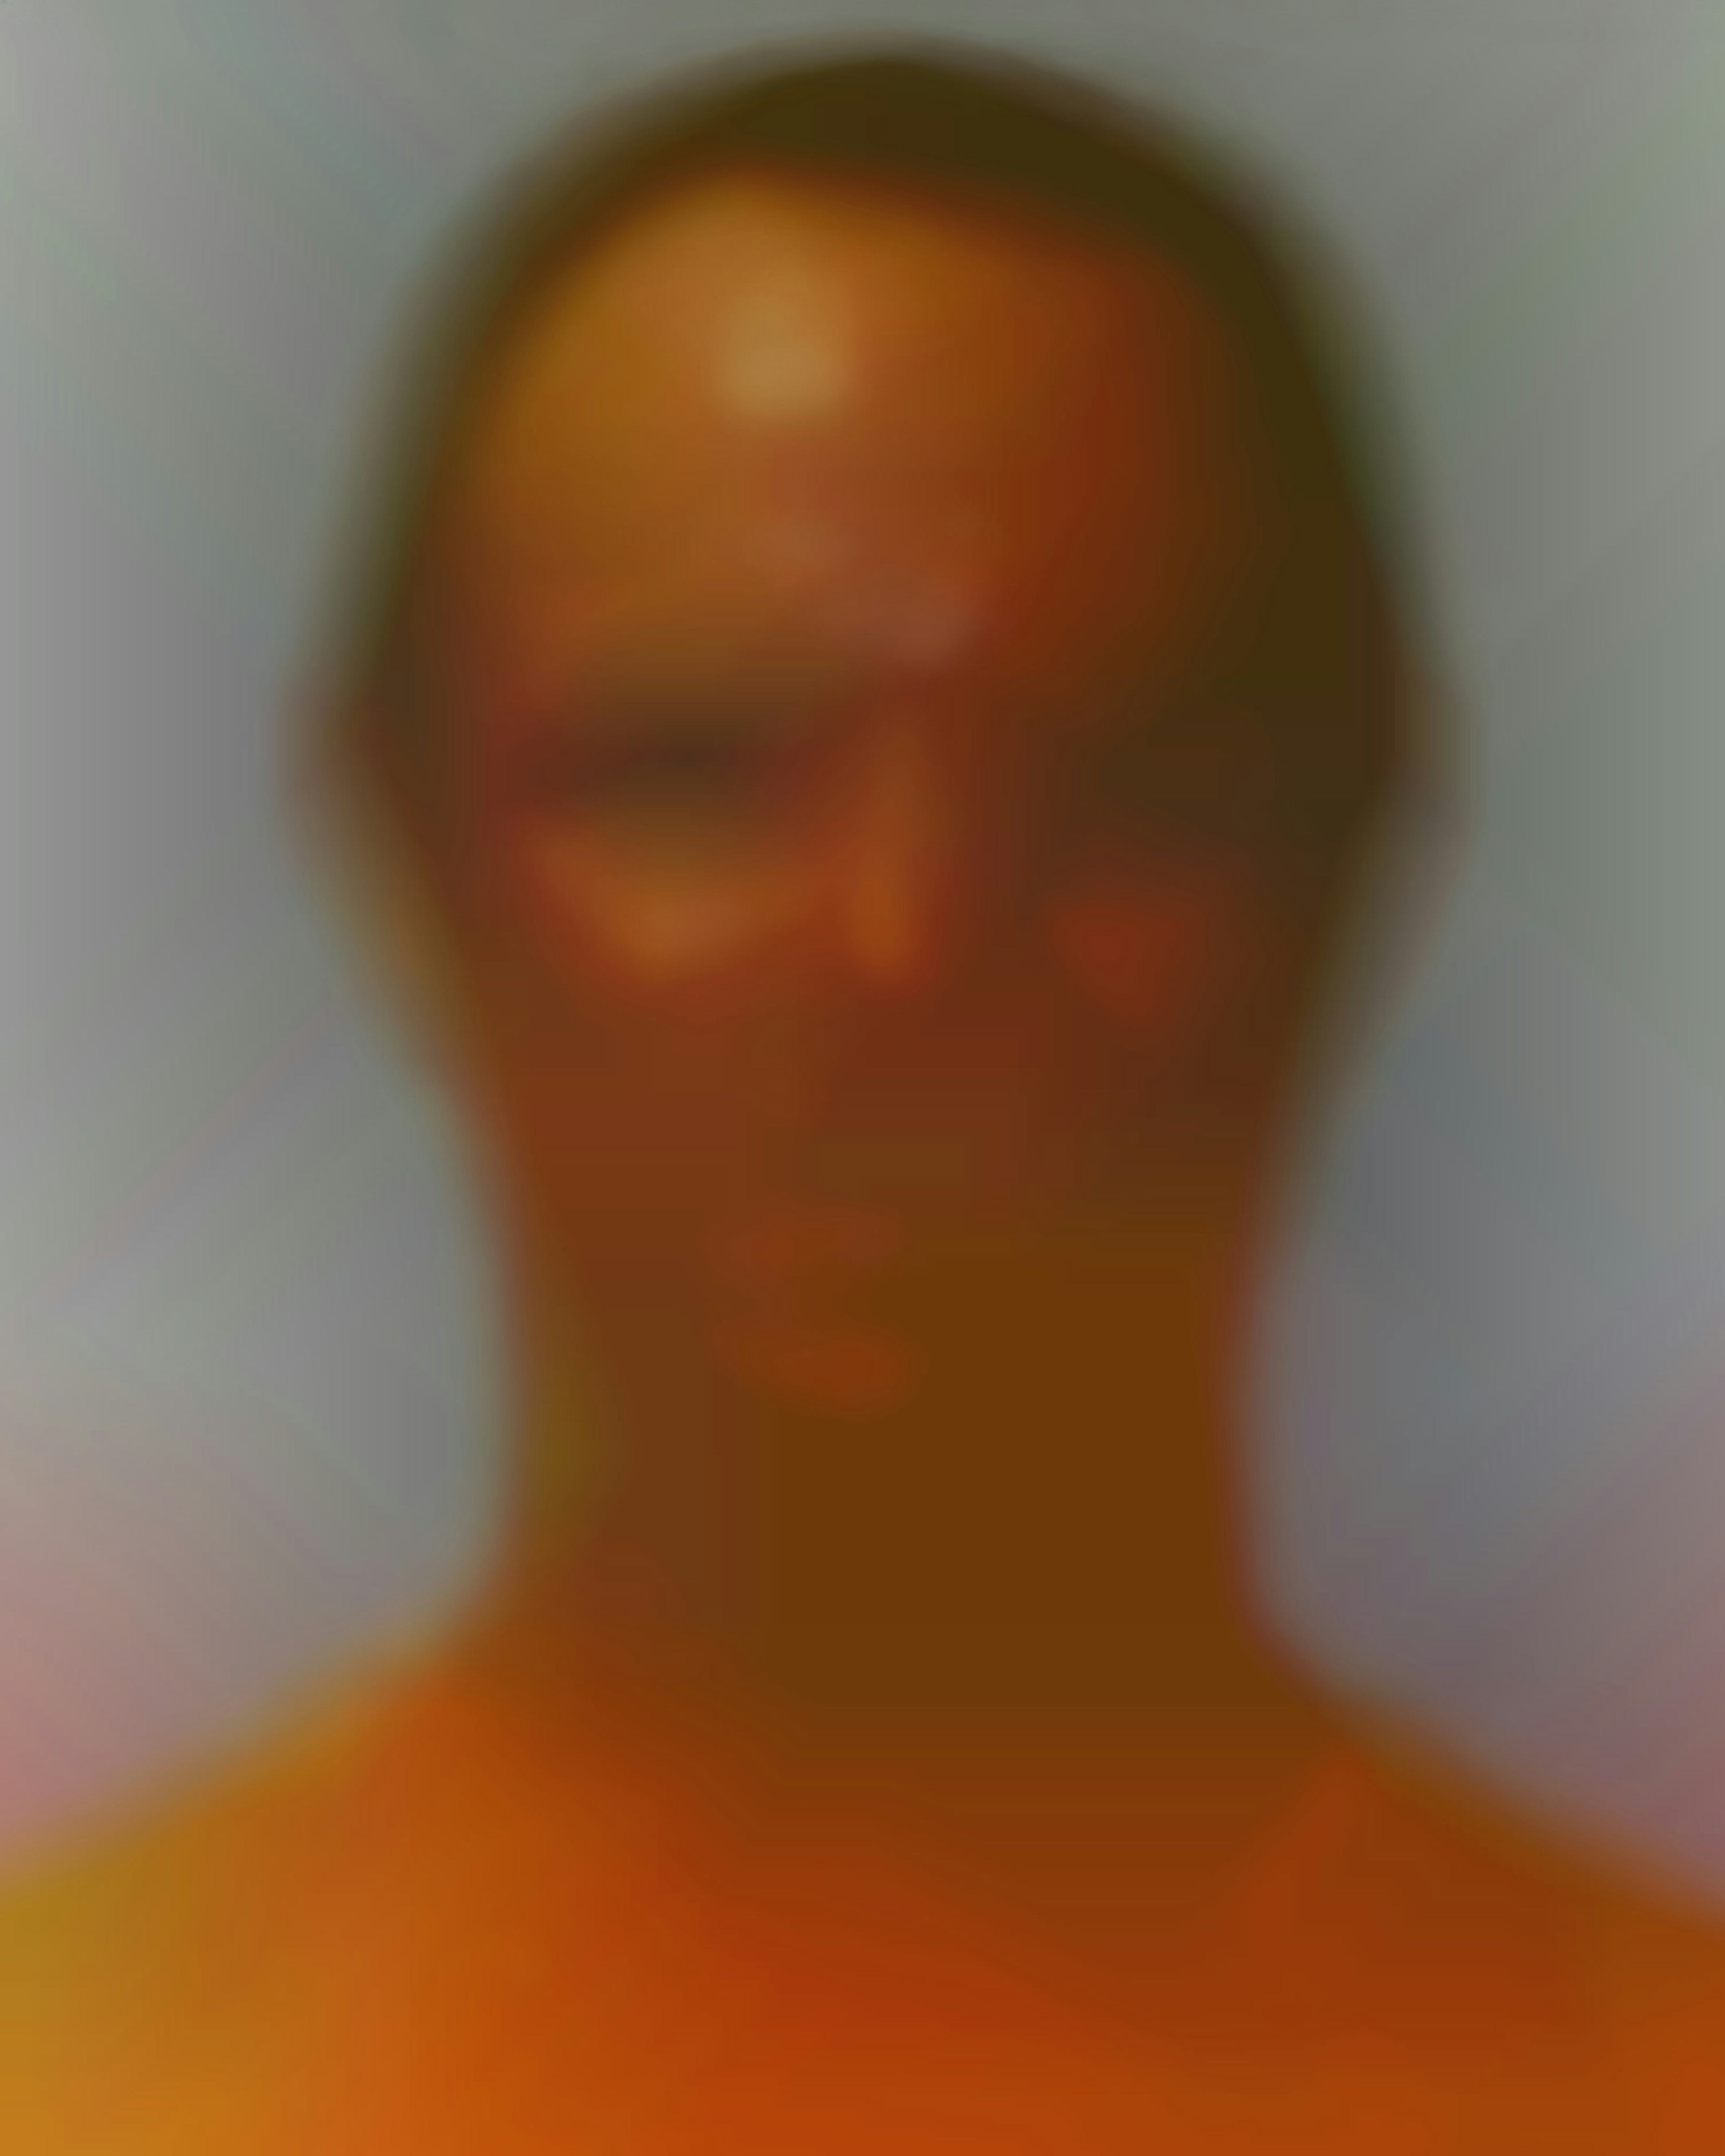 Blurry portrait of a male-presenting figure, with warm coloured tones